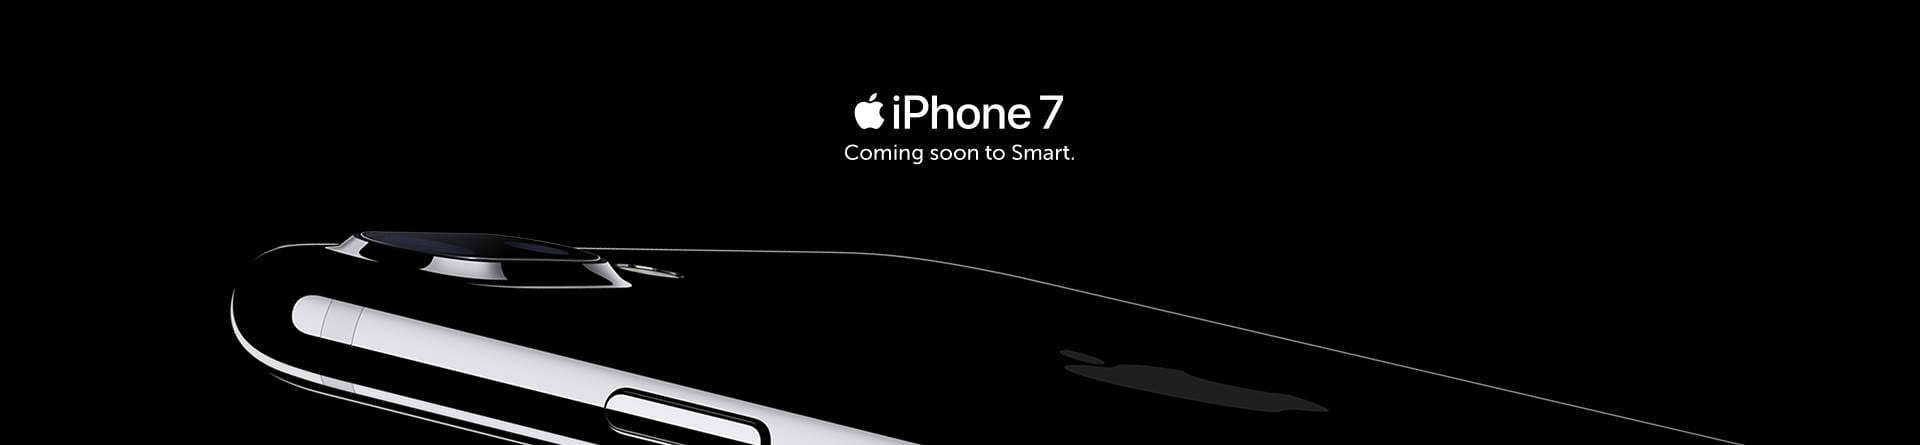 iphone 7 philippines smart offers